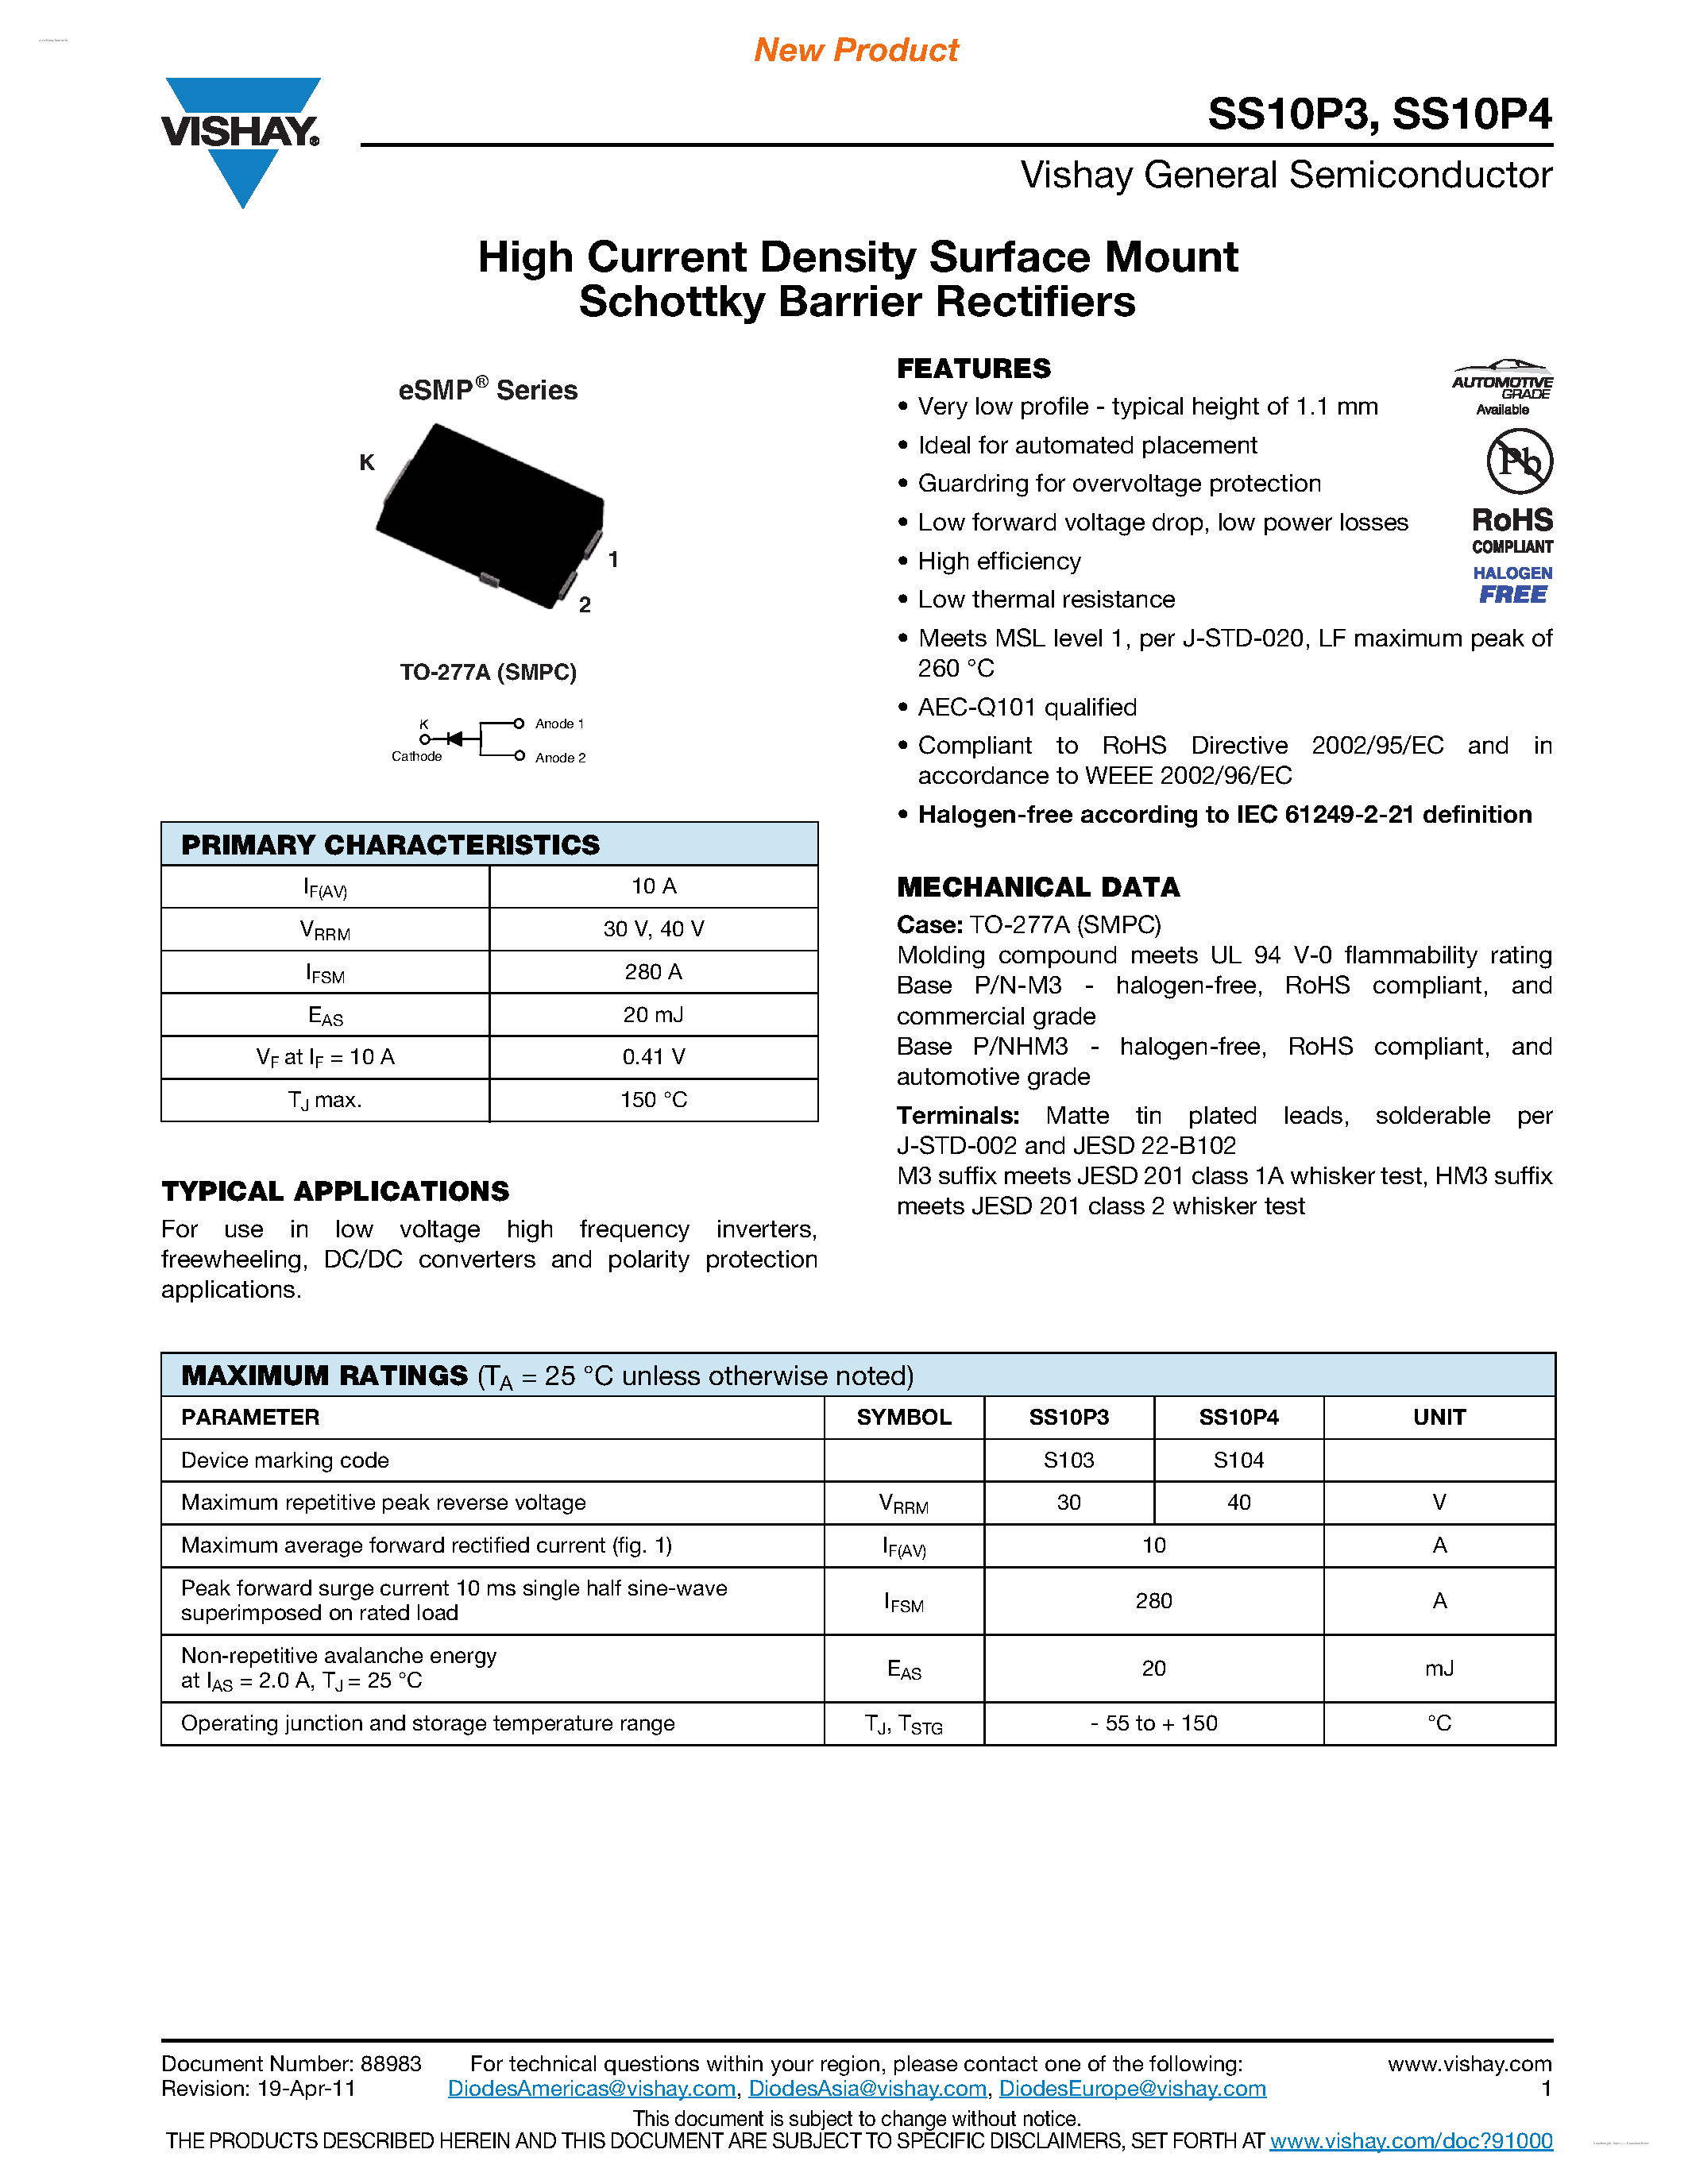 Даташит SS10P3 - (SS10P3 / SS10P4) High Current Density Surface Mount Schottky Barrier Rectifiers страница 1